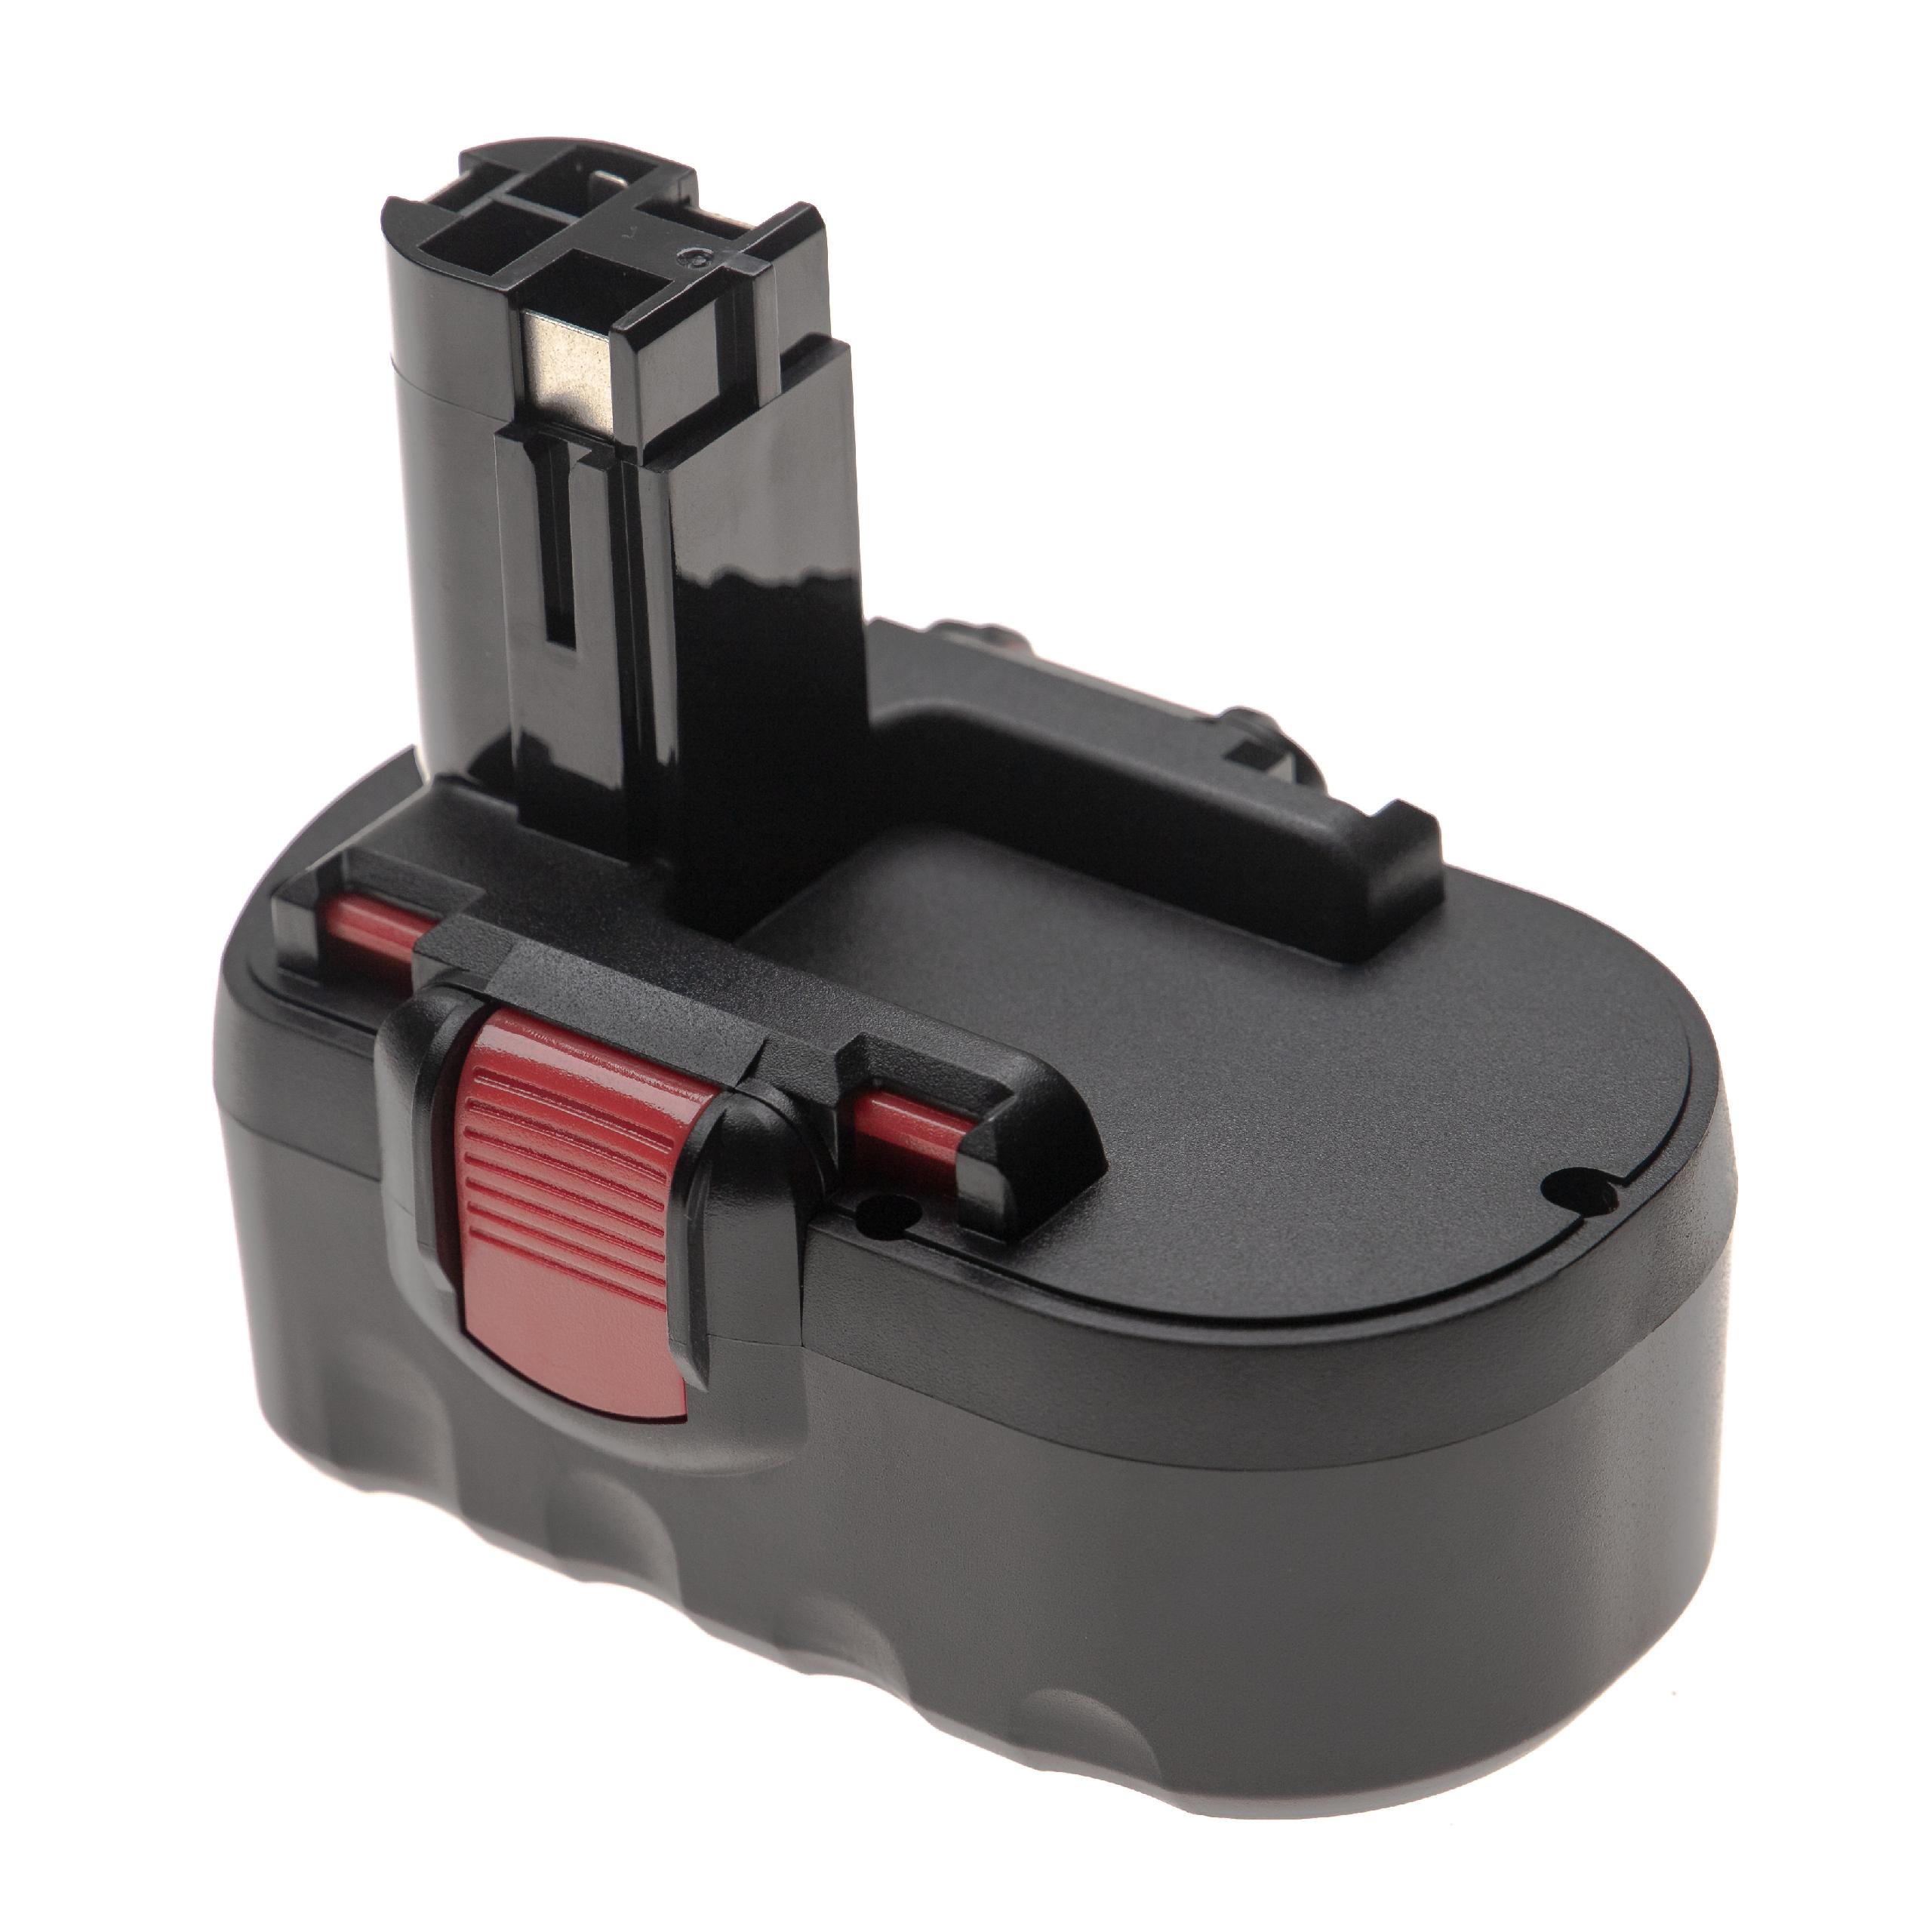 Electric Power Tool Battery Replaces Bosch 2 607 335 266, 2 607 335 278, 2607335535 - 1500 mAh, 18 V, NiMH